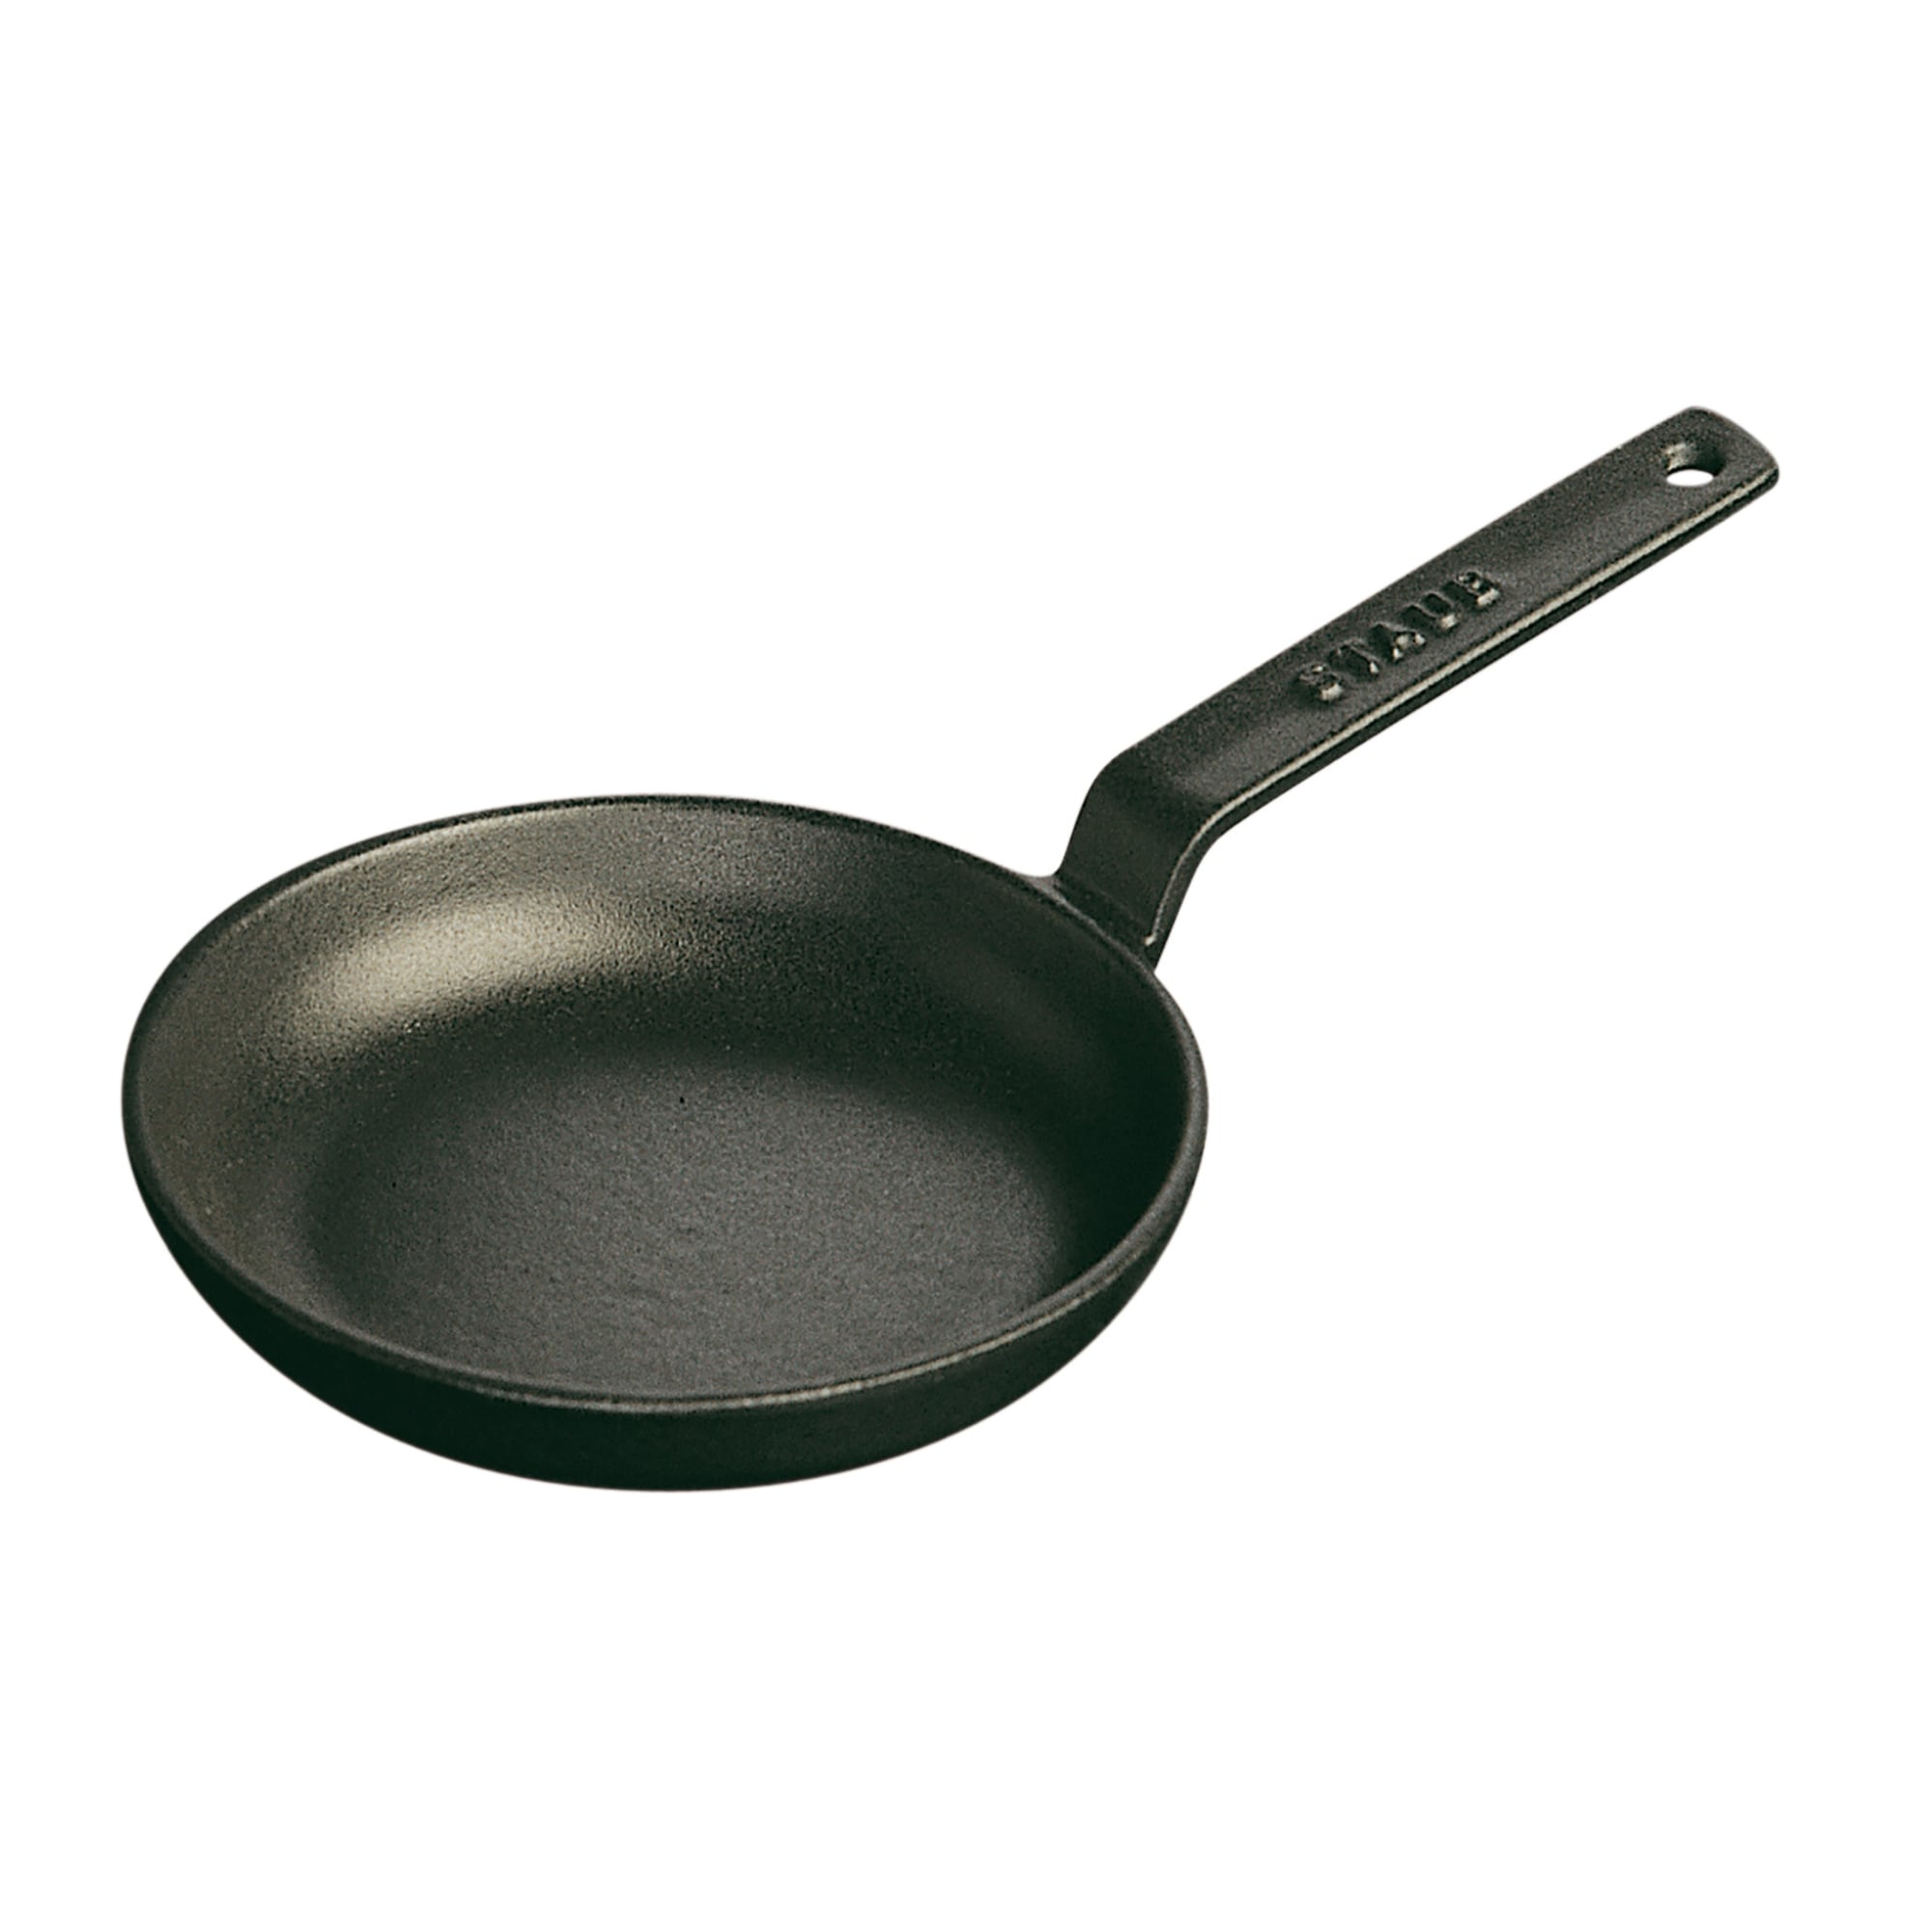 https://ak1.ostkcdn.com/images/products/is/images/direct/7d387fb6a8342f4c04cd230a1f3054fed49276da/Staub-Cast-Iron-4.75-inch-Mini-Frying-Pan---Matte-Black.jpg